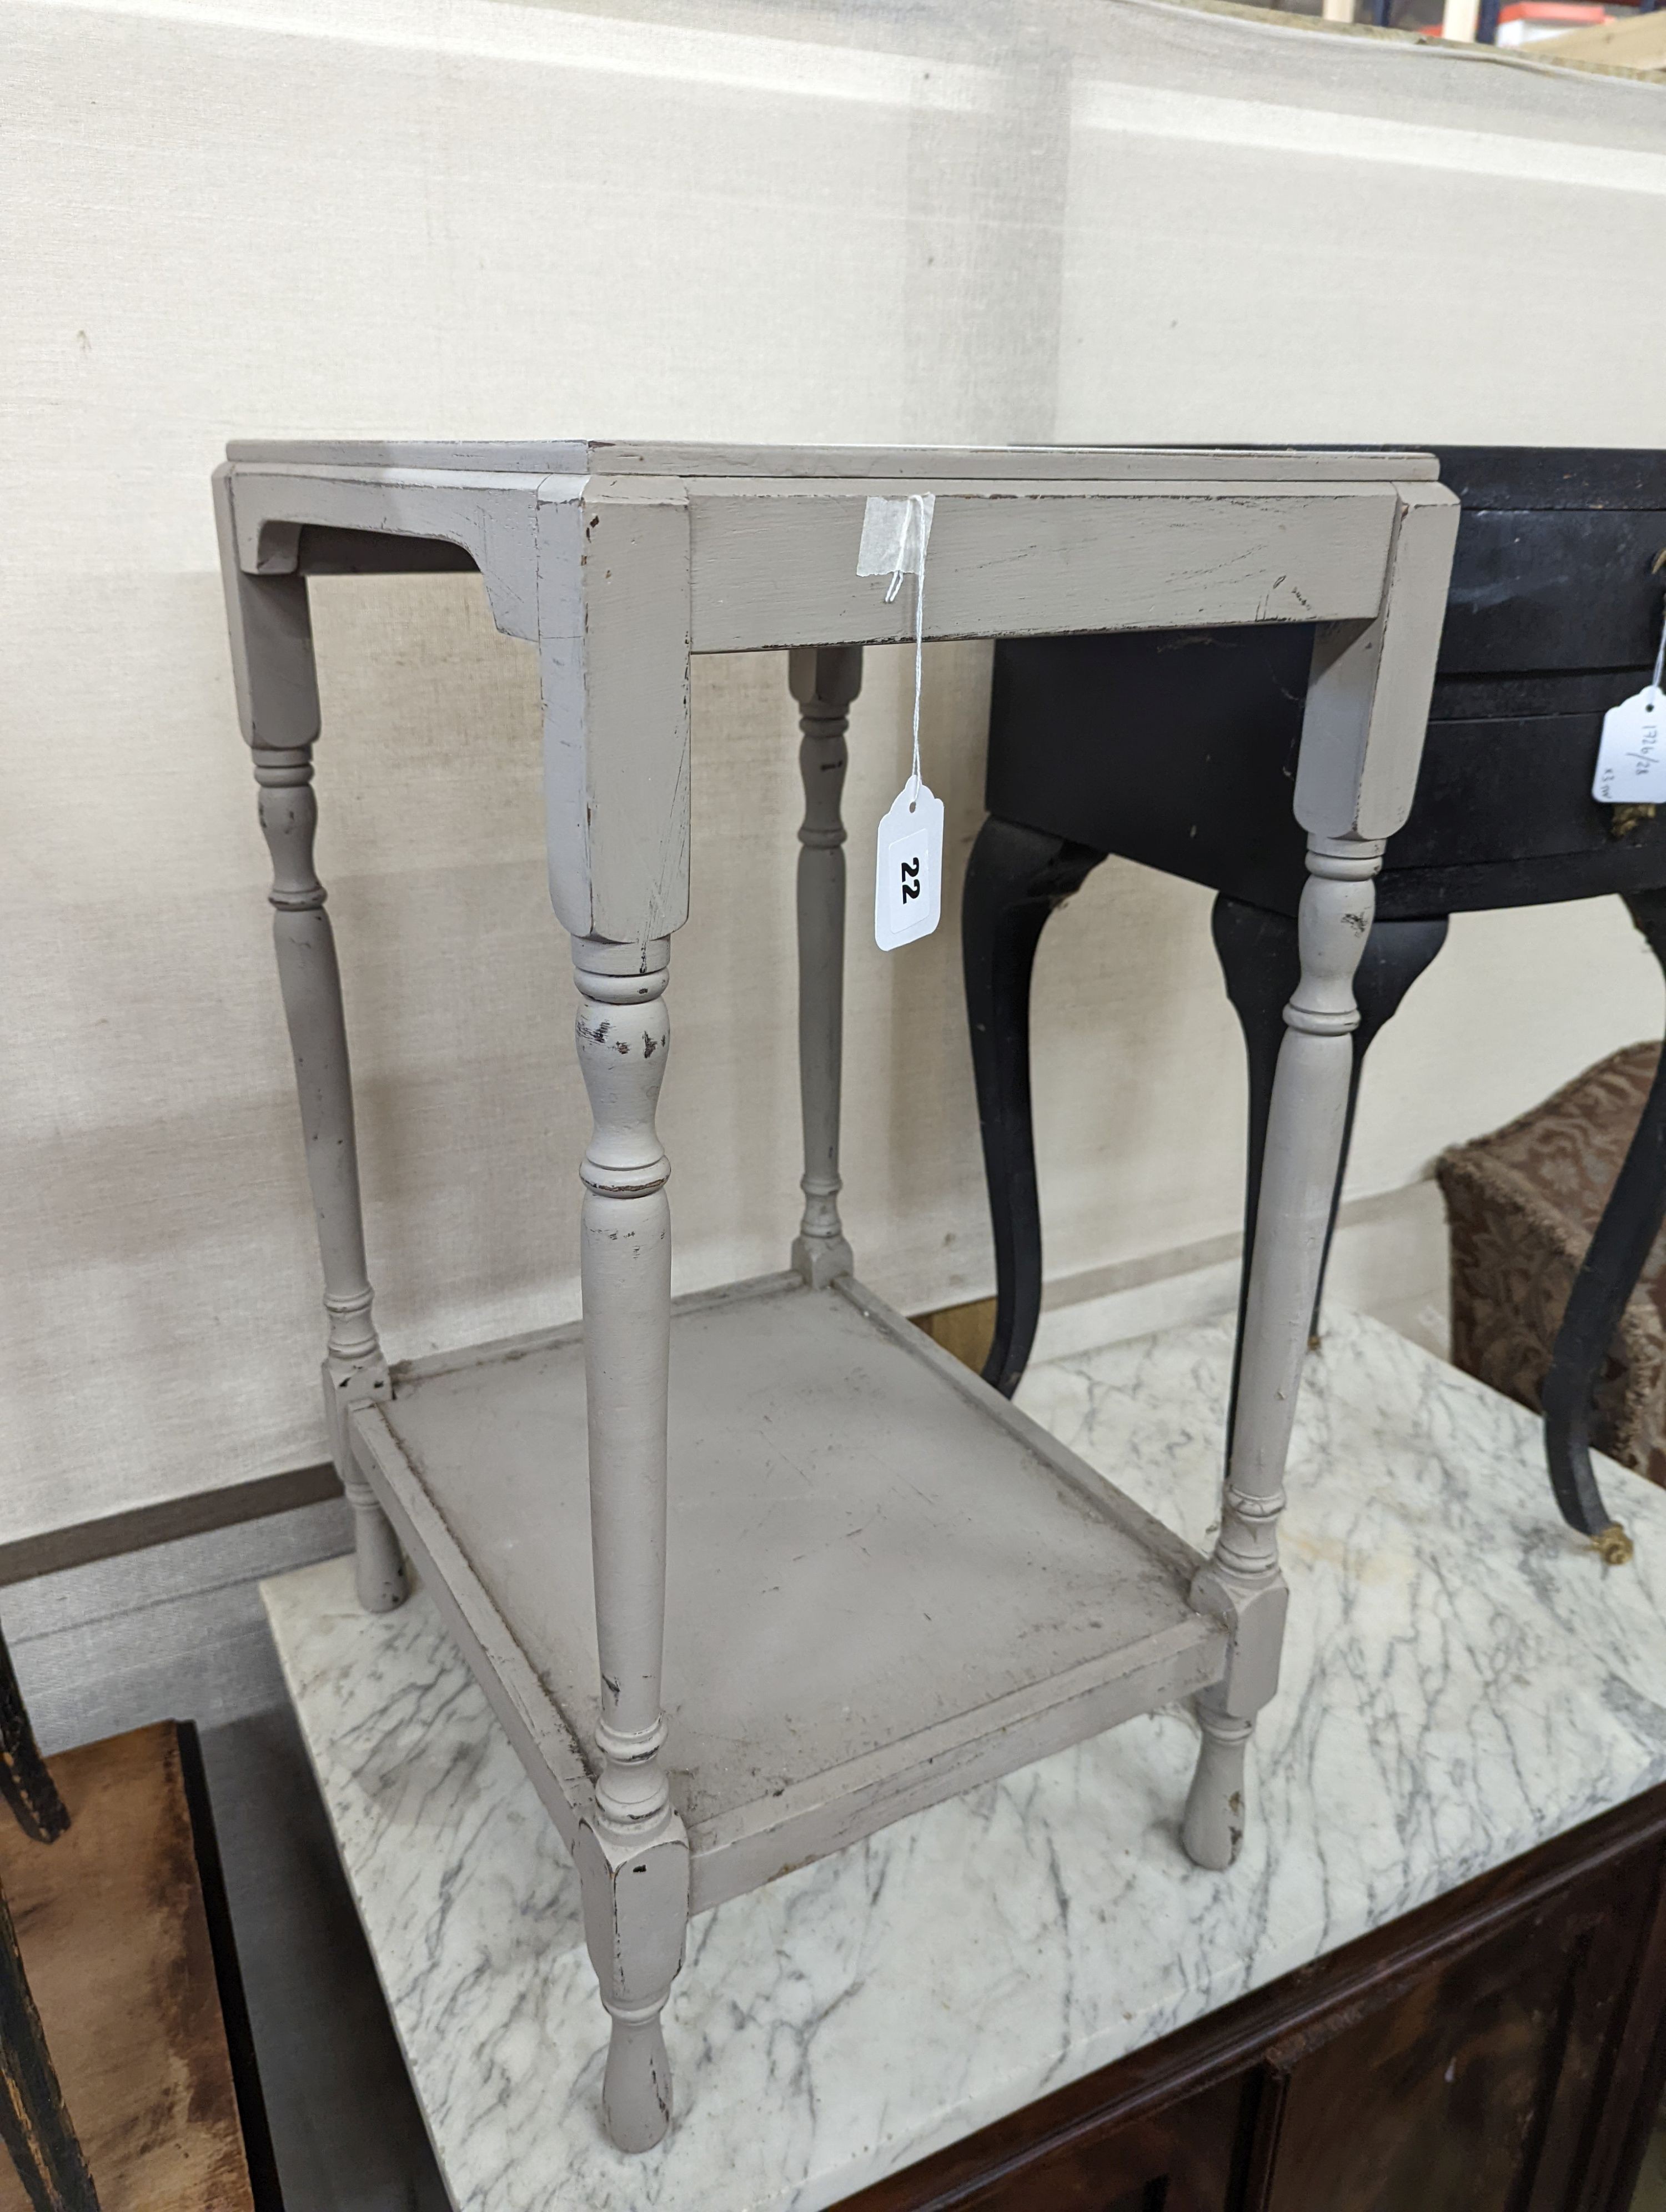 A painted two-tier table together with two other small painted tables, largest width 45cm, depth 36cm, height 69cm